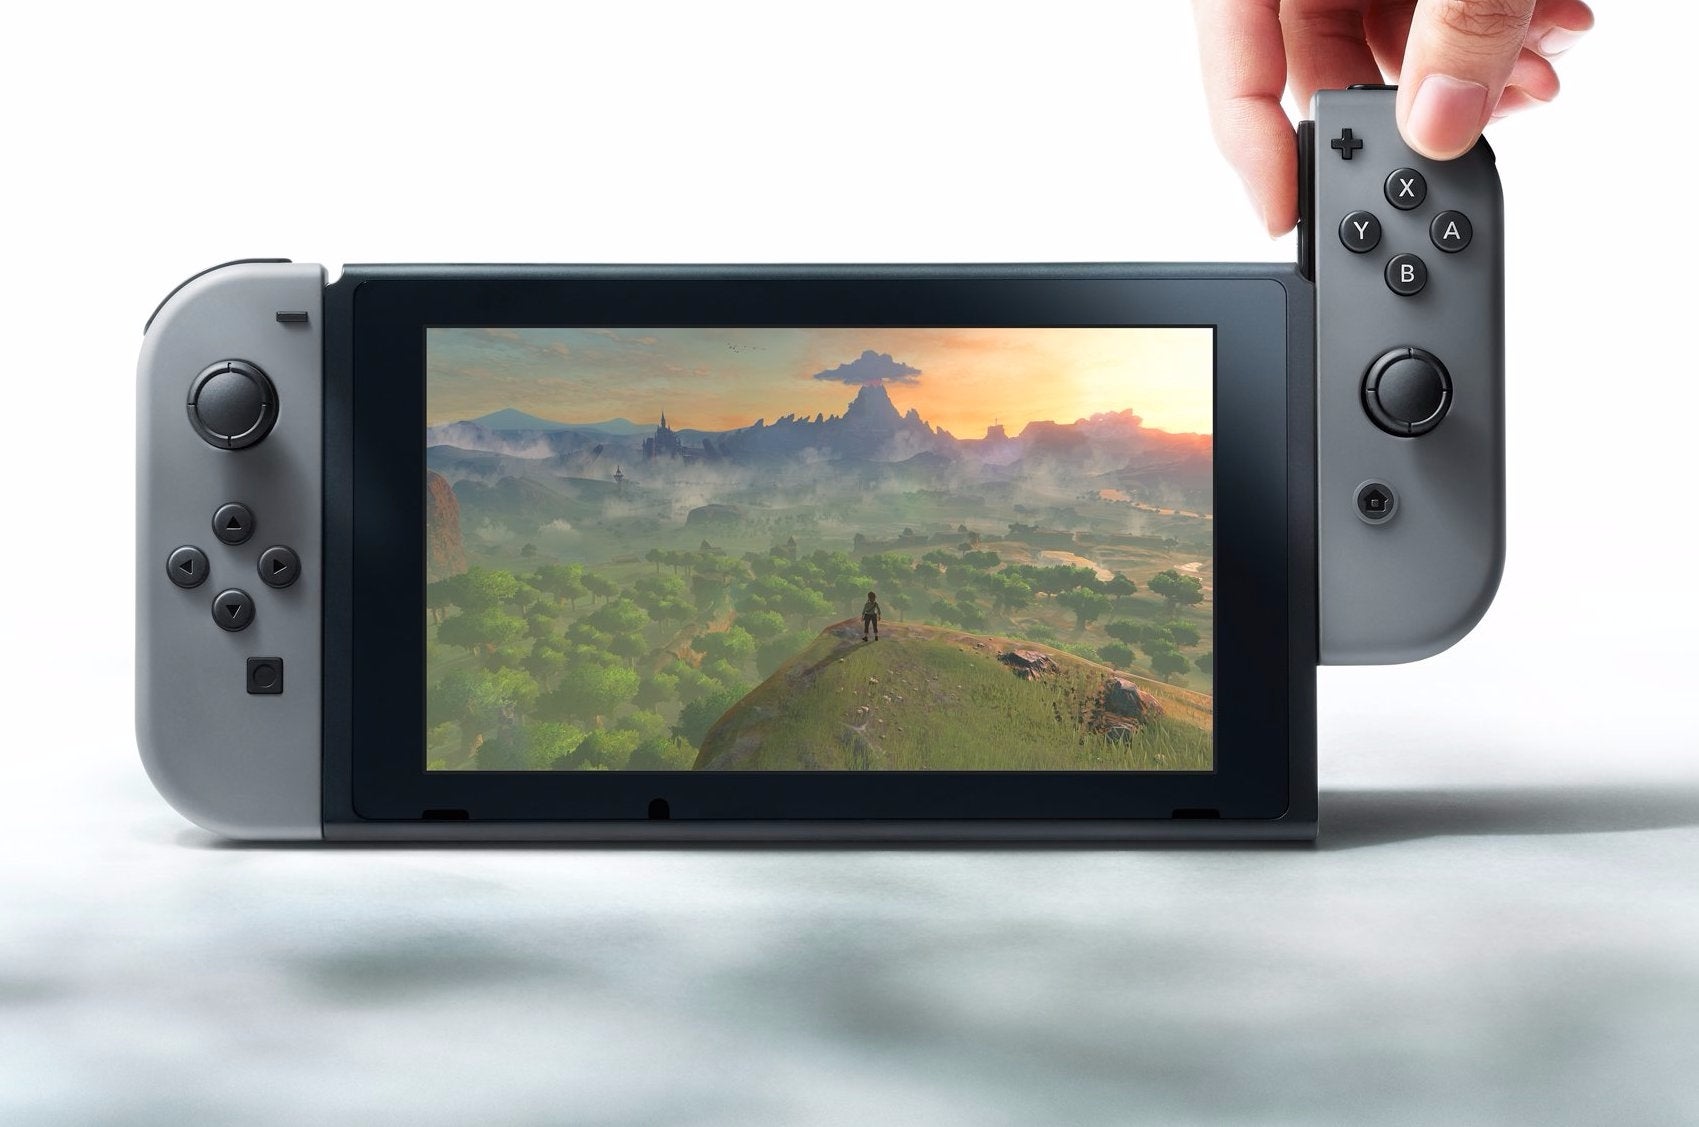 NX is now a portable console with detachable | Eurogamer.net